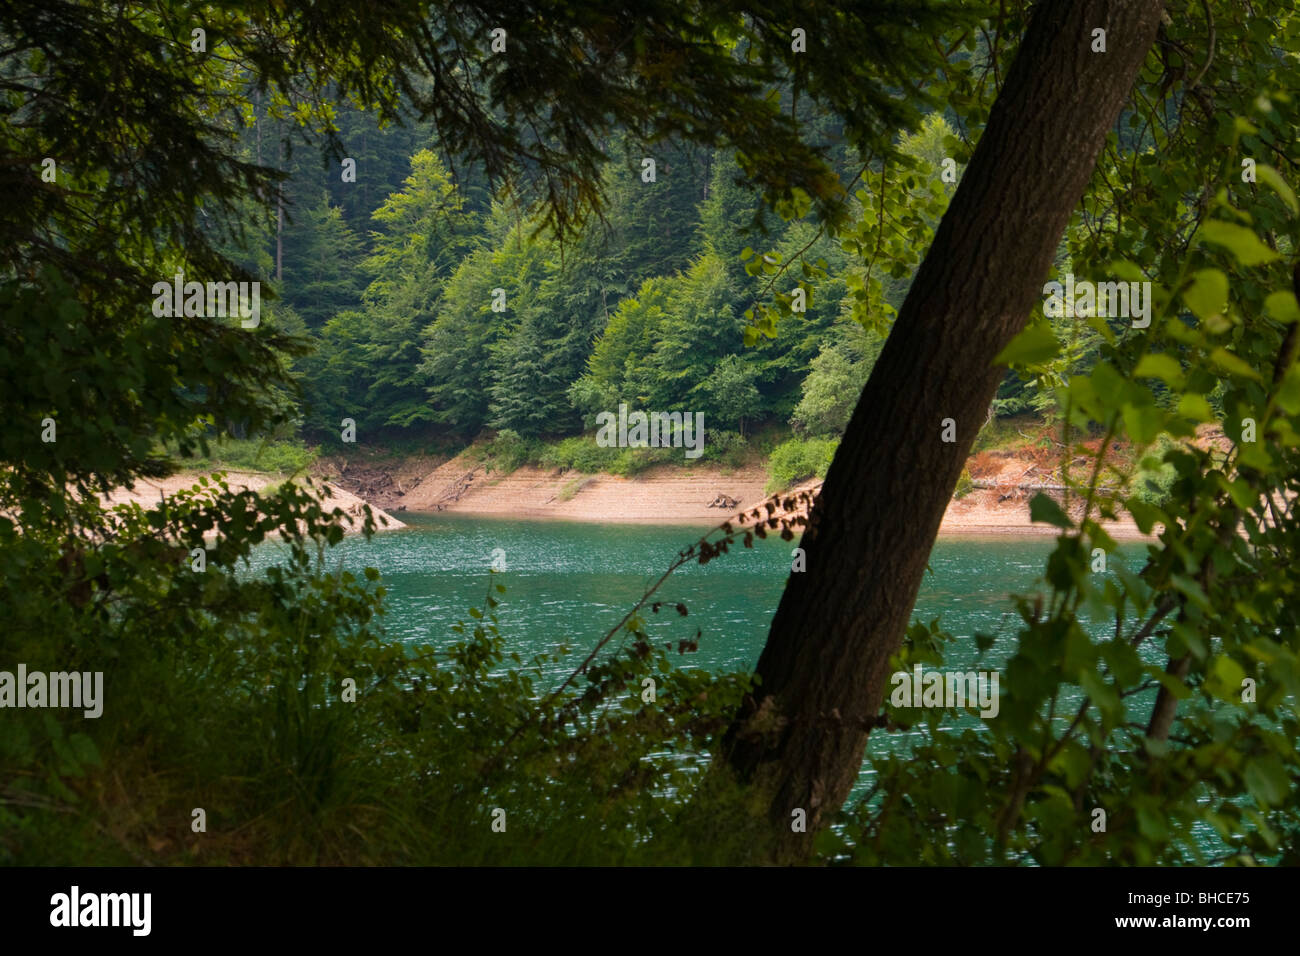 Lake in forest Stock Photo